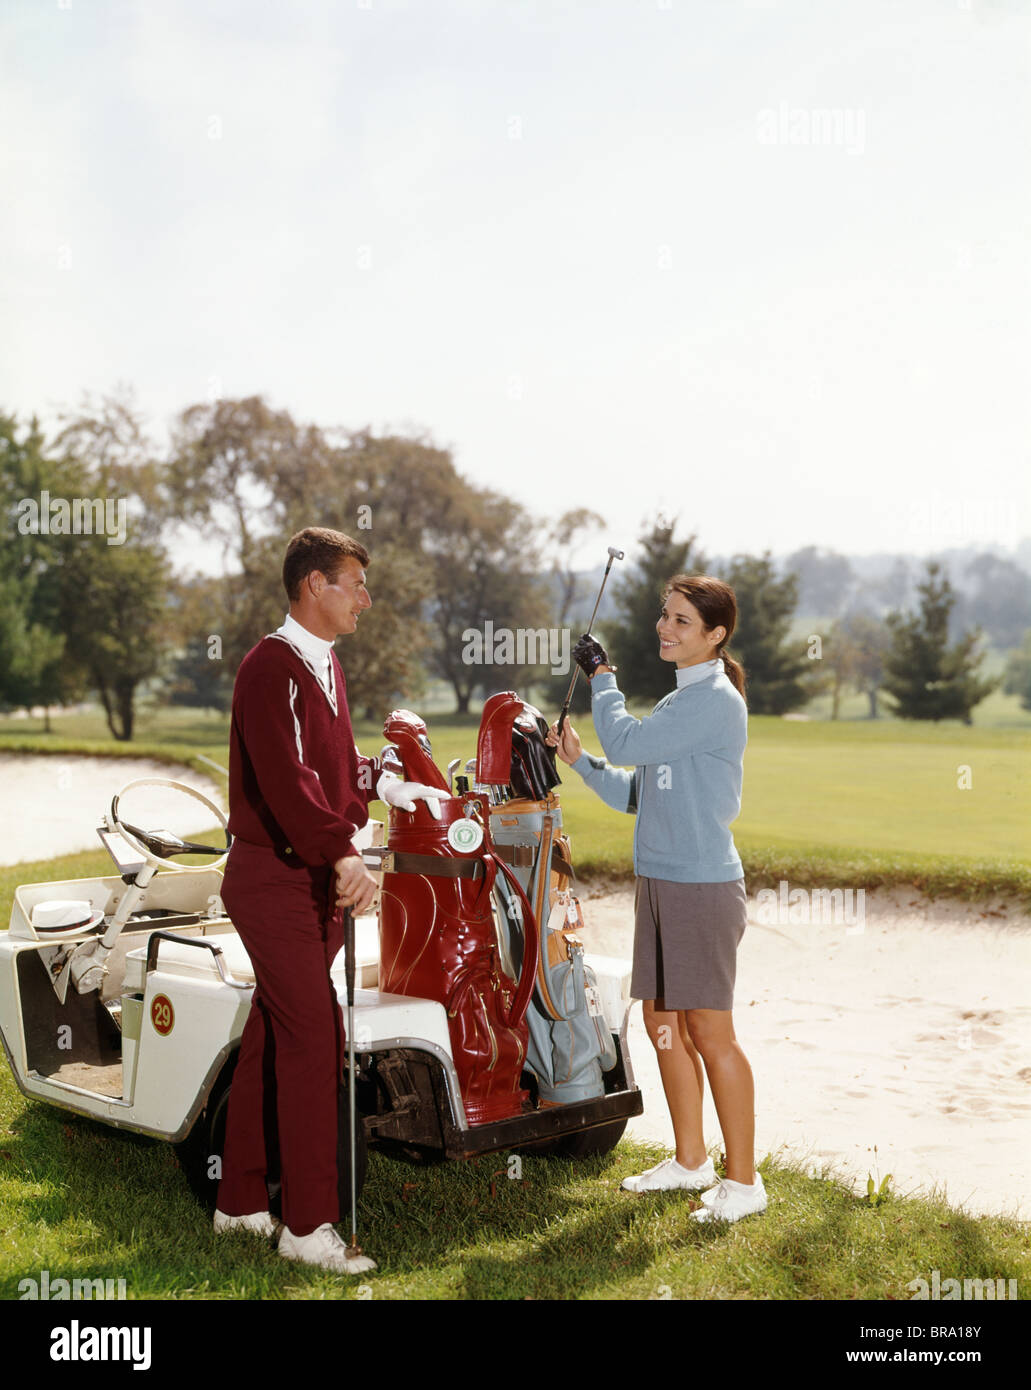 1960s SMILING COUPLE MAN WOMAN SELECTING GOLF CLUBS FROM GOLF BAG ON CART BY SAND TRAP Stock Photo